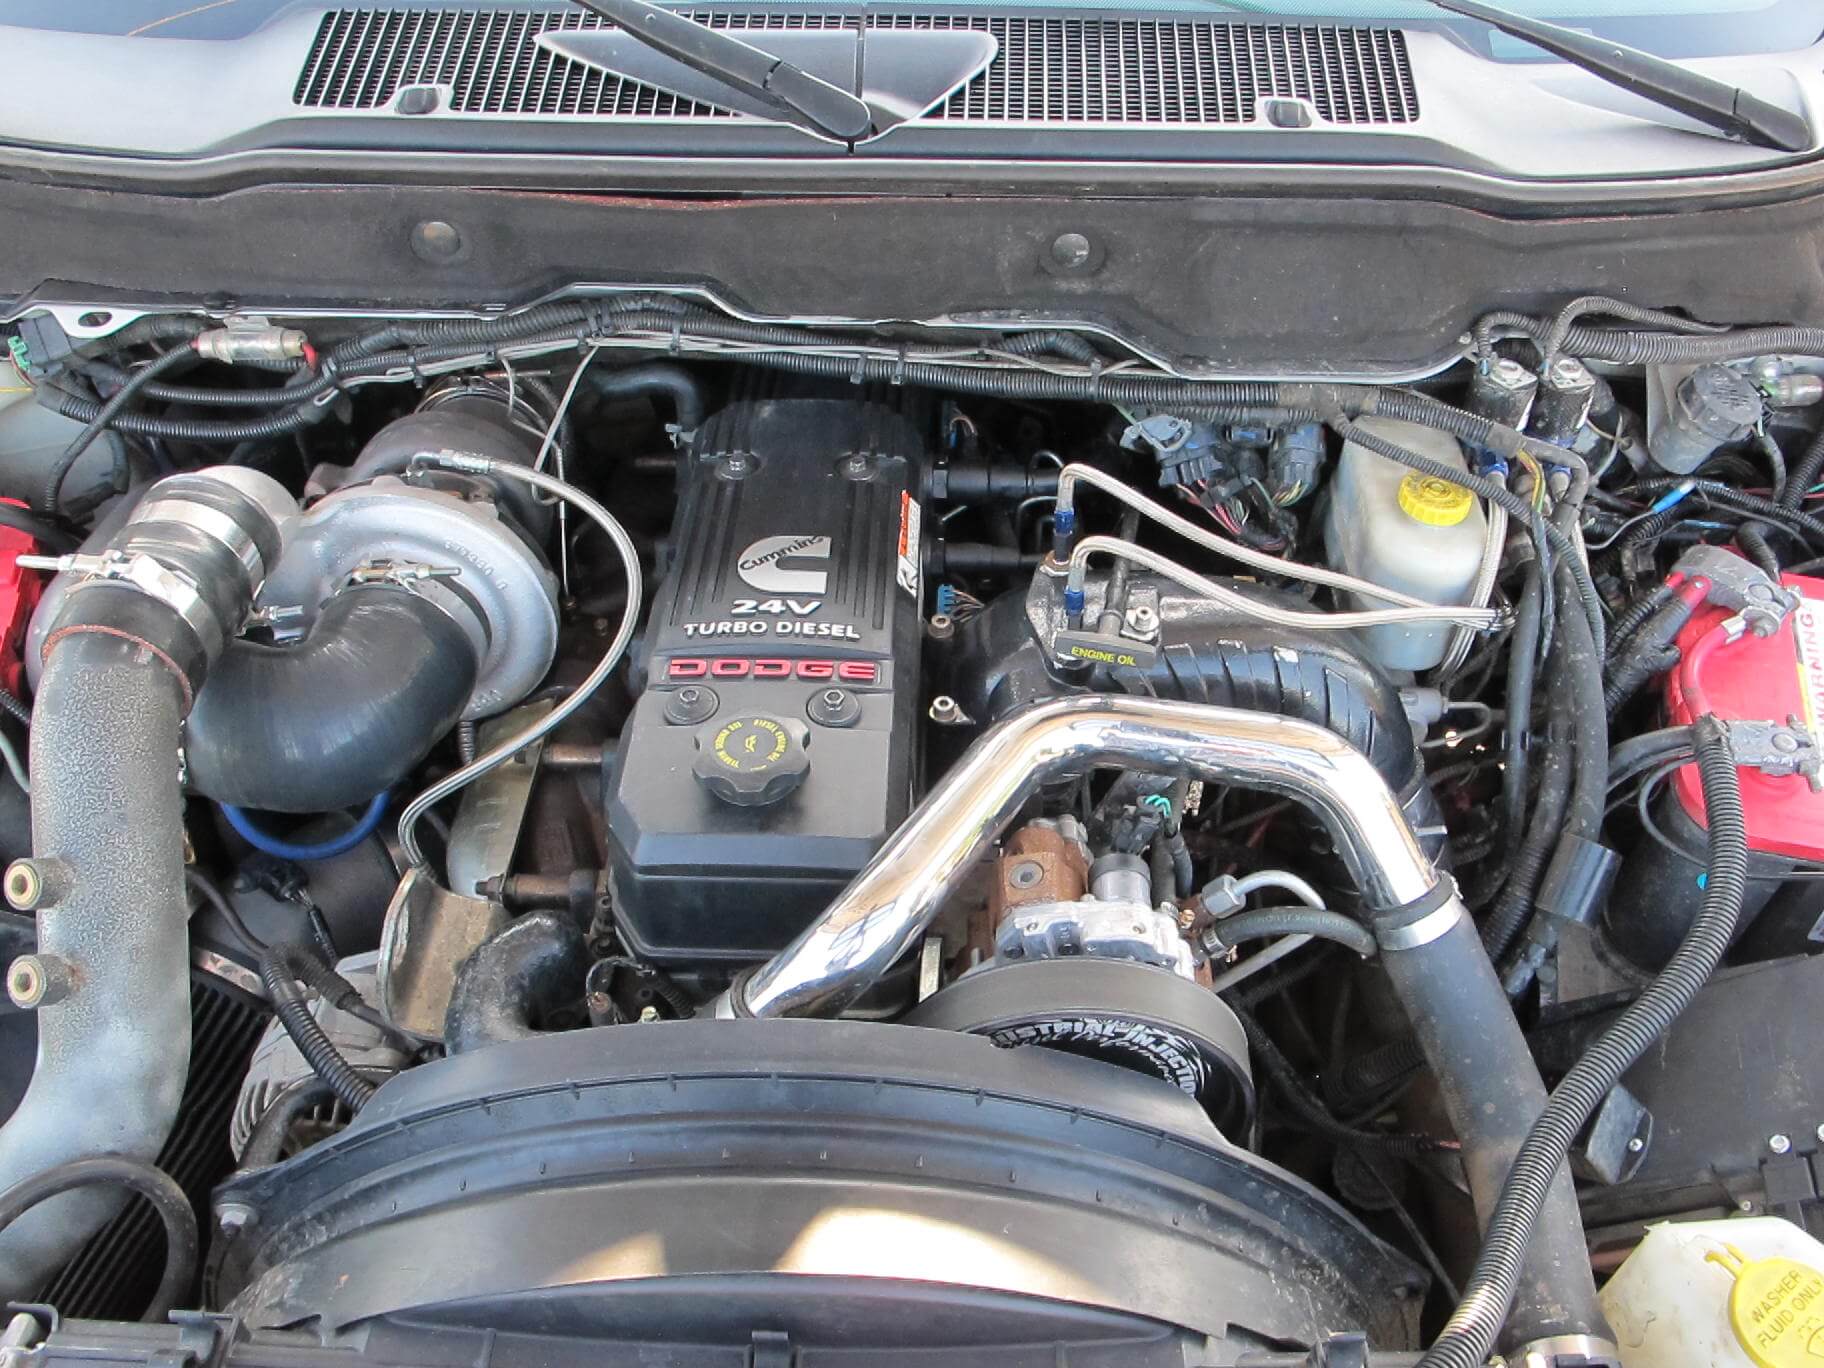 The Cummins 24V Turbo Diesel now runs compound turbos, twin CP3 fuel pumps and an aFe BladeRunner intake manifold, among other mods.